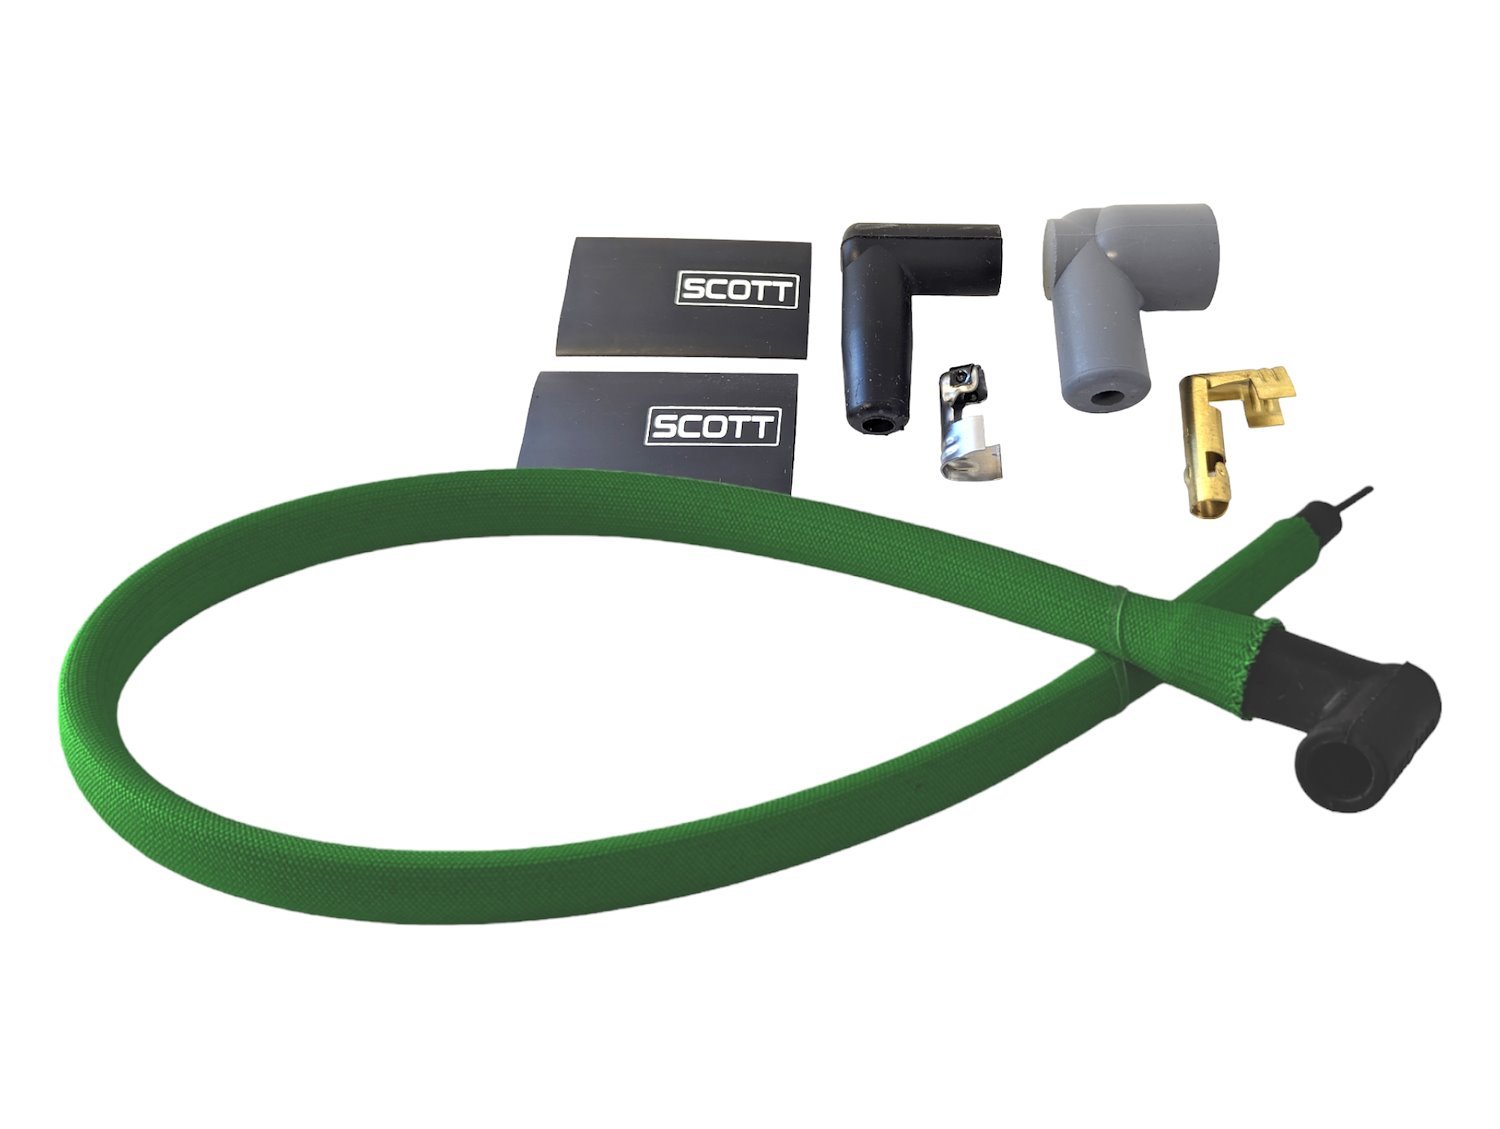 SPW-PSCW-48-4 48 in. High-Performance Fiberglass-Oversleeved Coil Wire Kit for Universal Coil Wire Kits [Green]